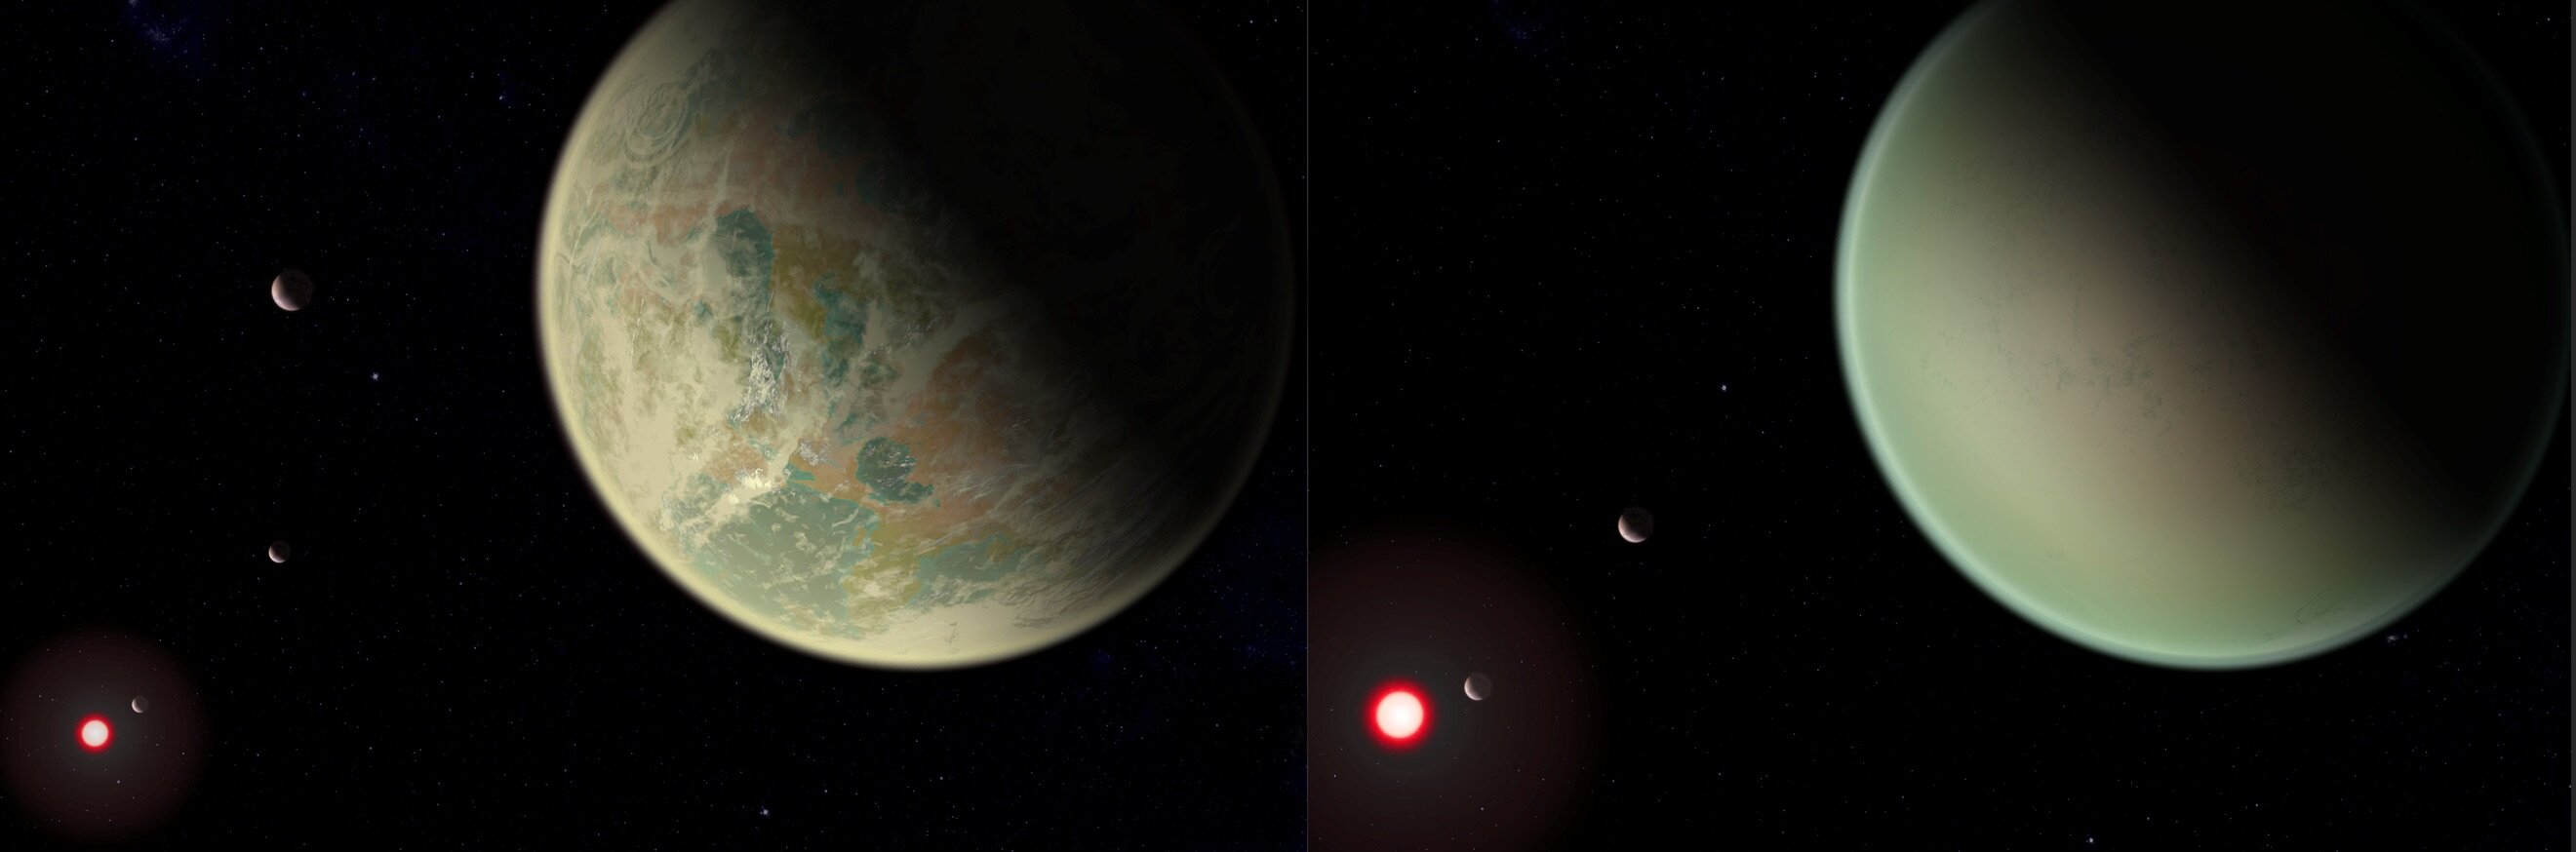 Scientists develop new method to detect oxygen on exoplanets - Phys.org